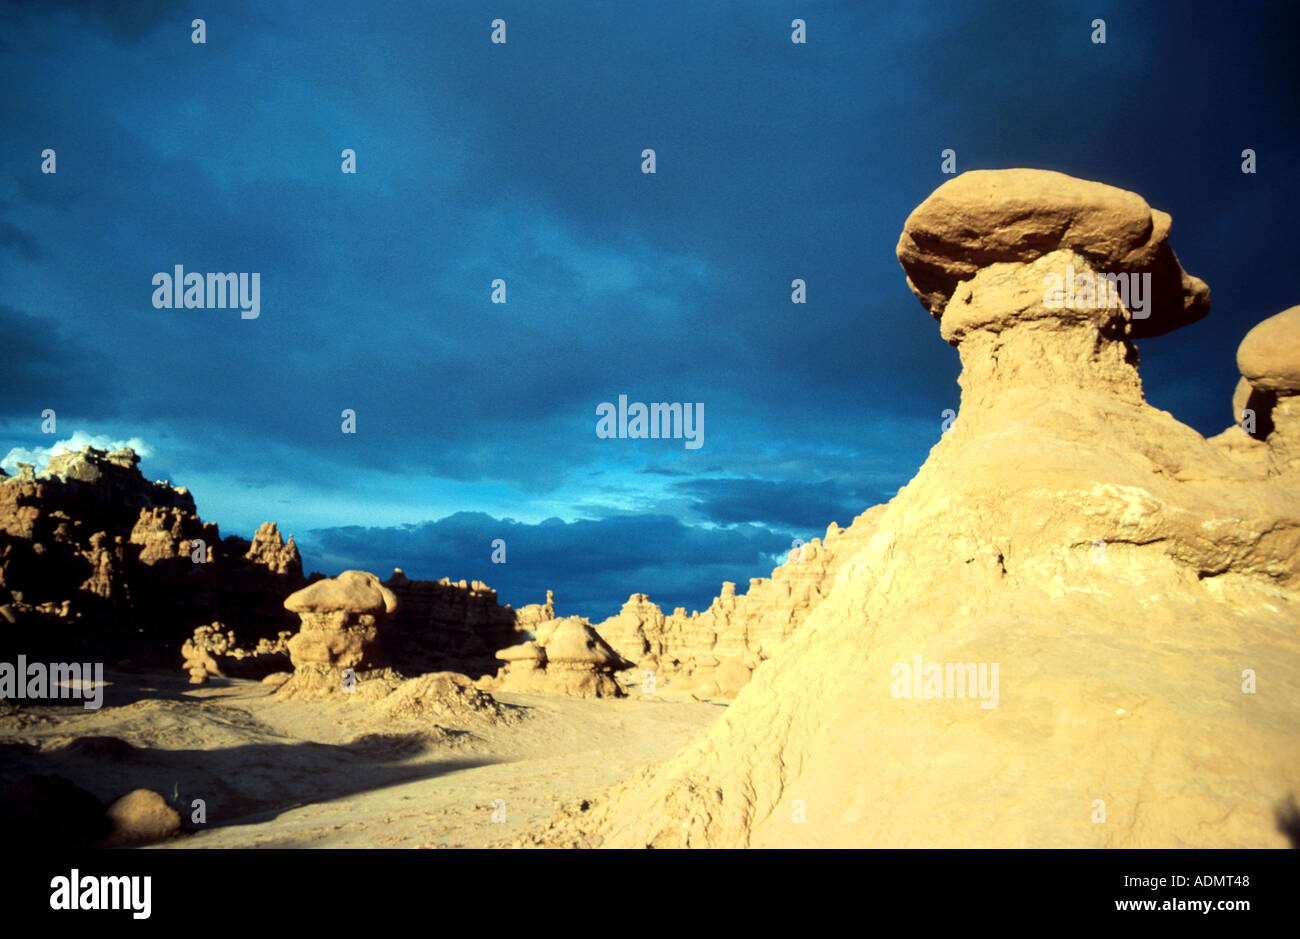 Hoodoo, eroded pillar protected at the top by a more highly resistant boulderUSA, Utah, Goblin Valley, Jun 99. Stock Photo